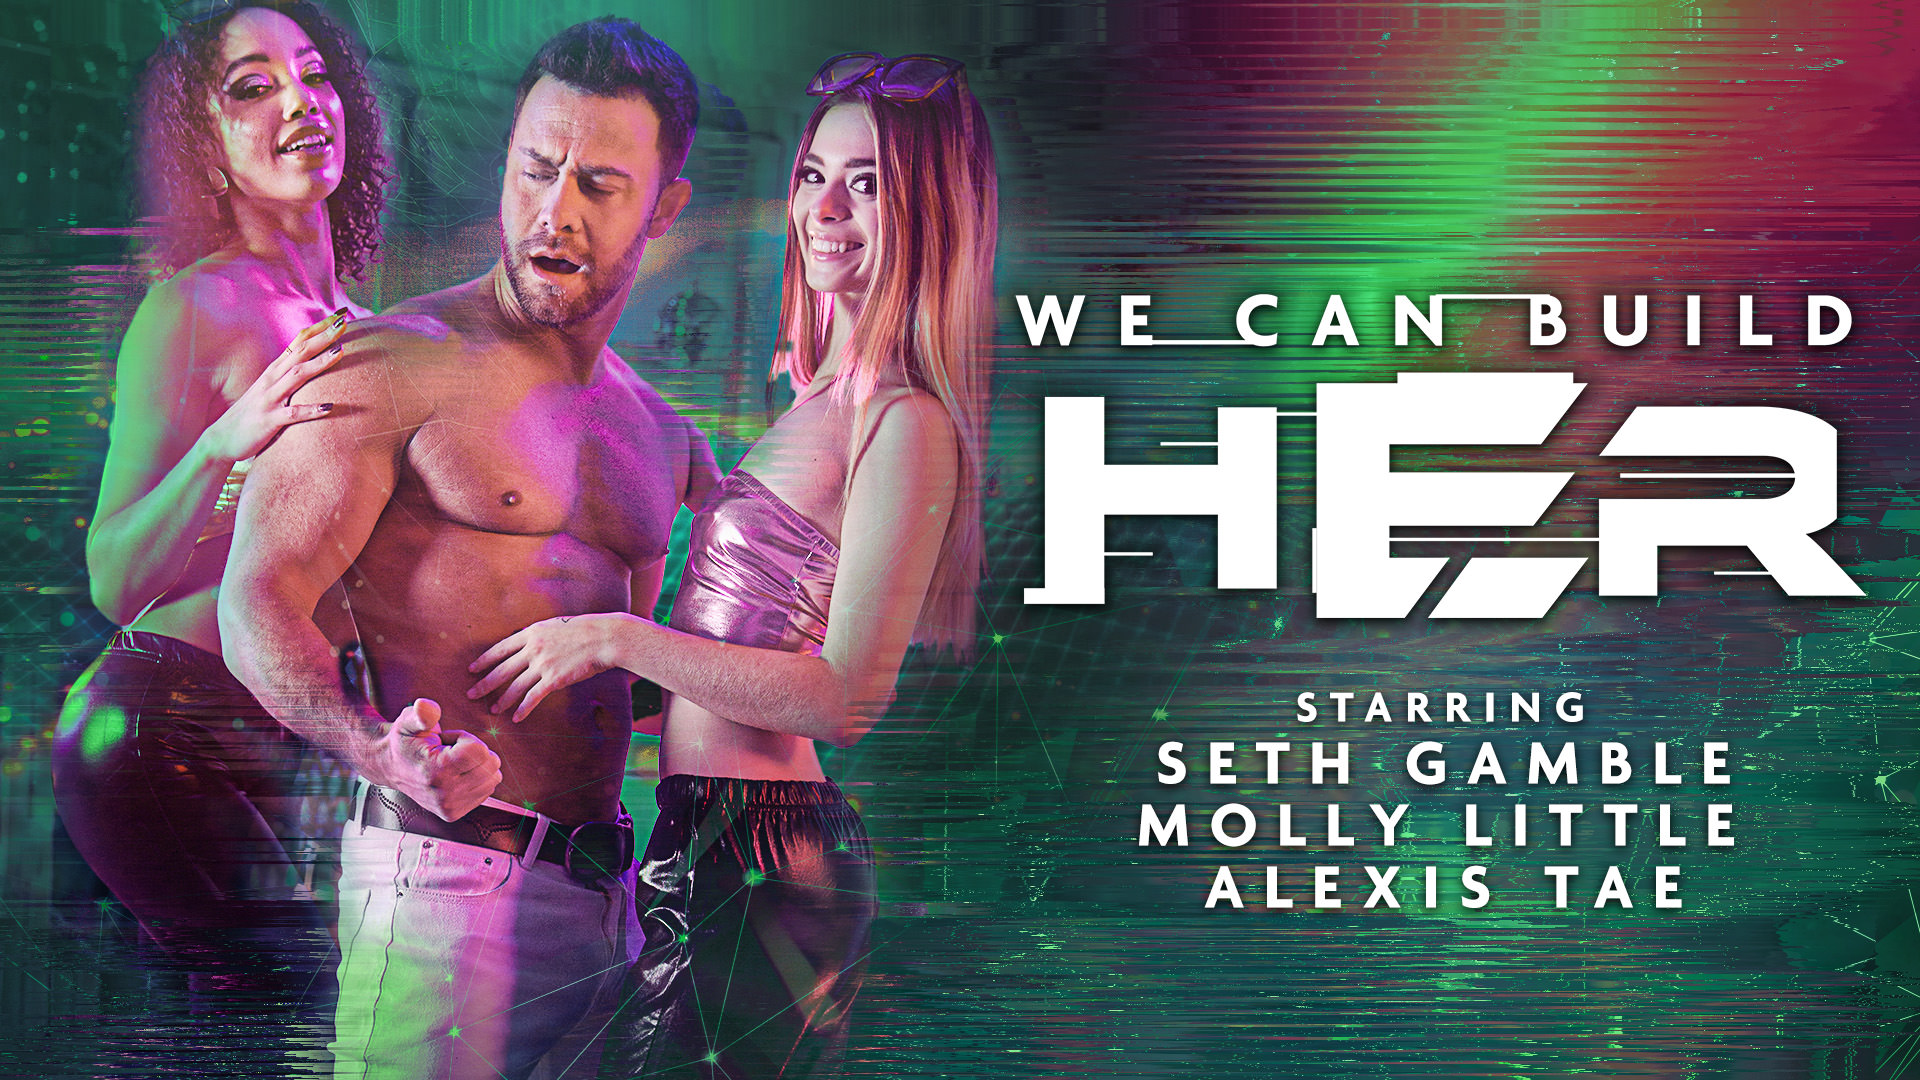 Seth Gamble, Alexis Tae, Molly Little, Shawn Alff “We Can Build Her – Scene 2” Wicked